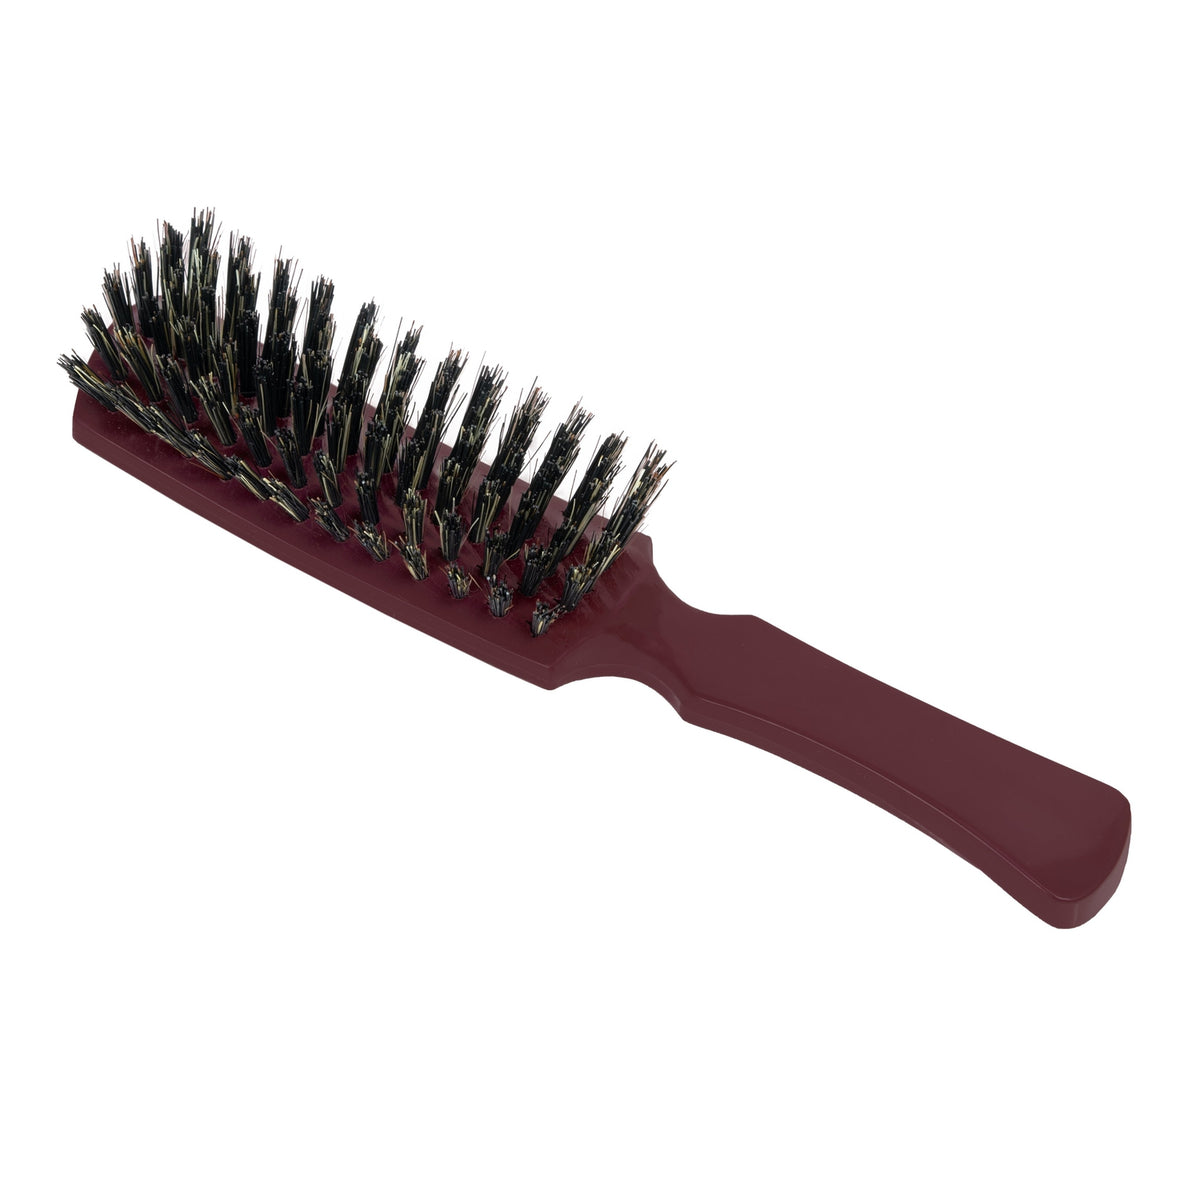 House of Fuller® Lustrebrush Professional With Natural Boars Hair Bristles  for Gentle Brushing